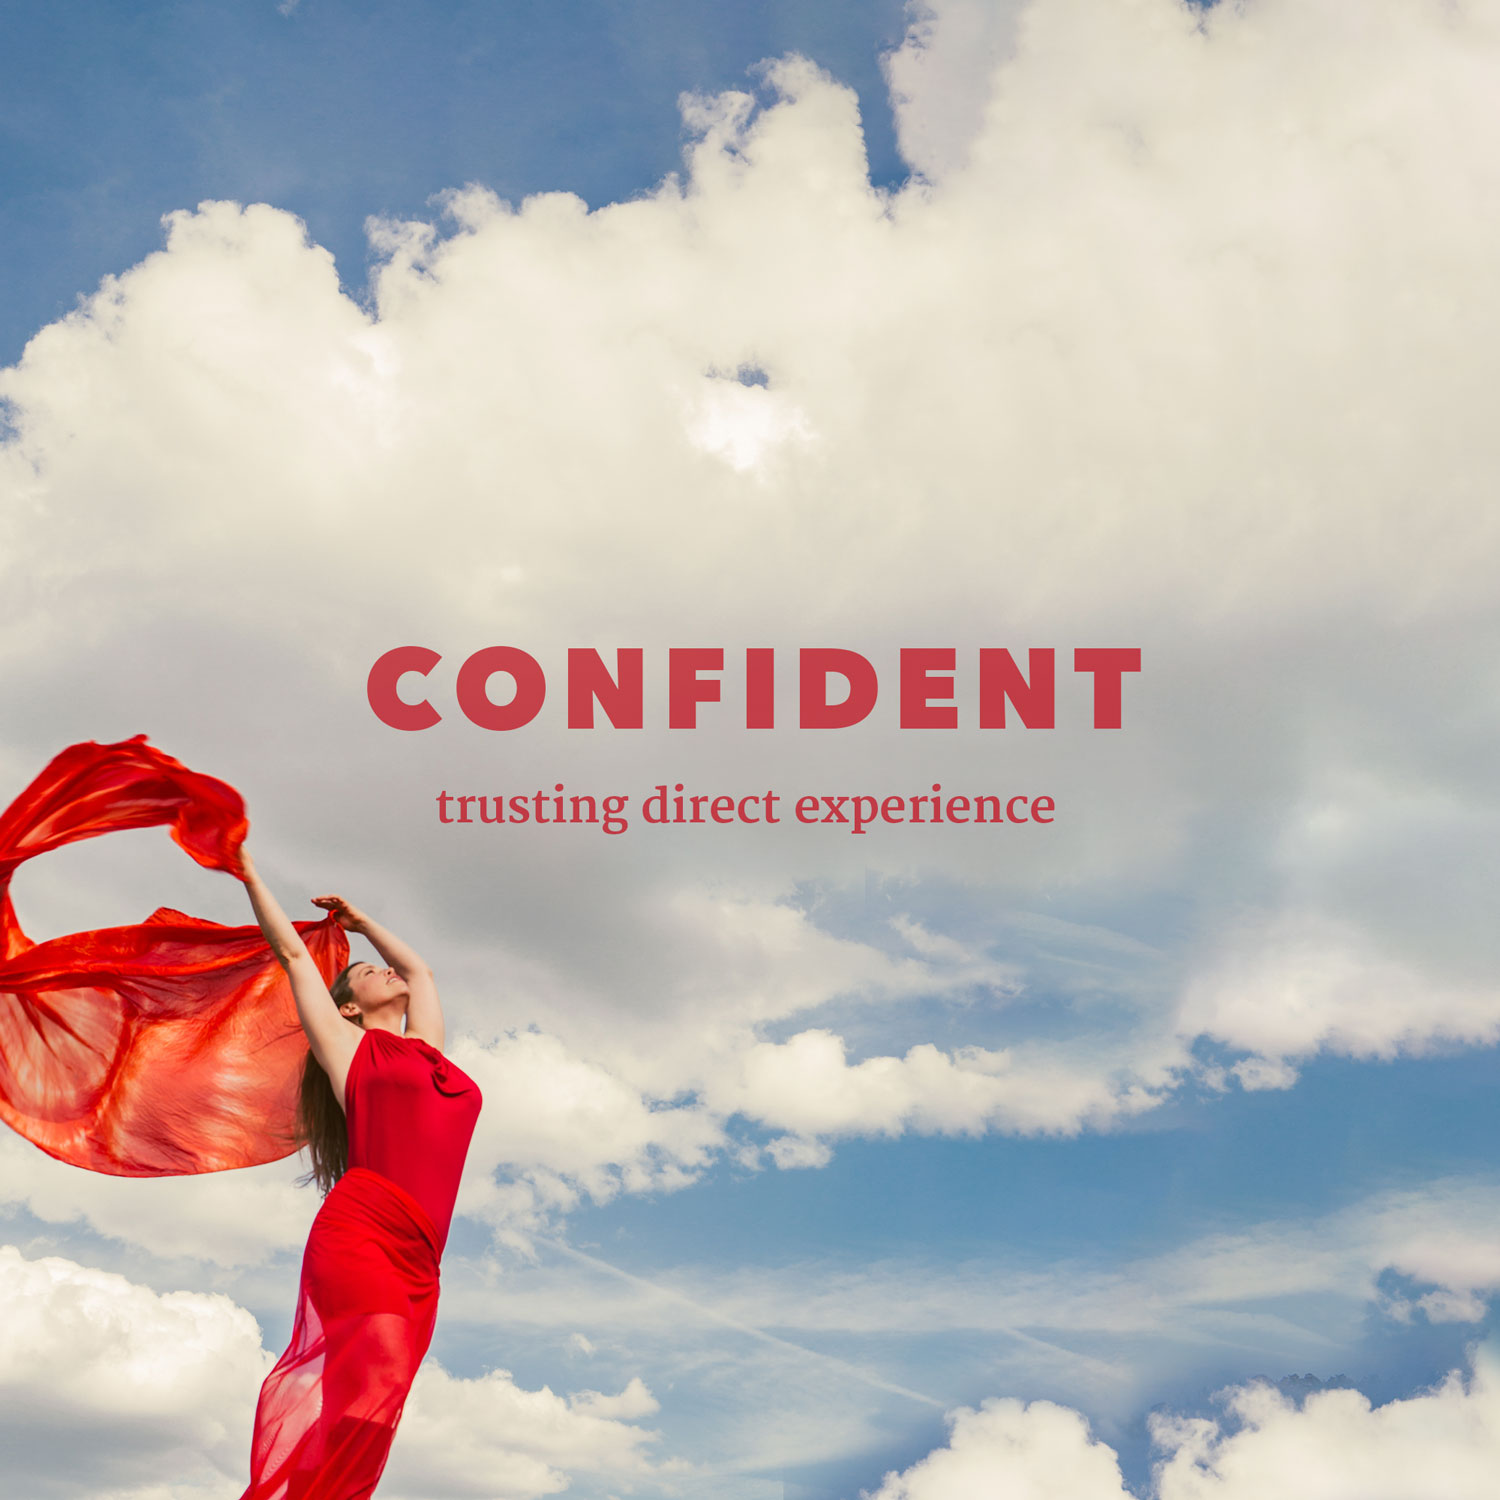 CONFIDENT – trusting direct experience